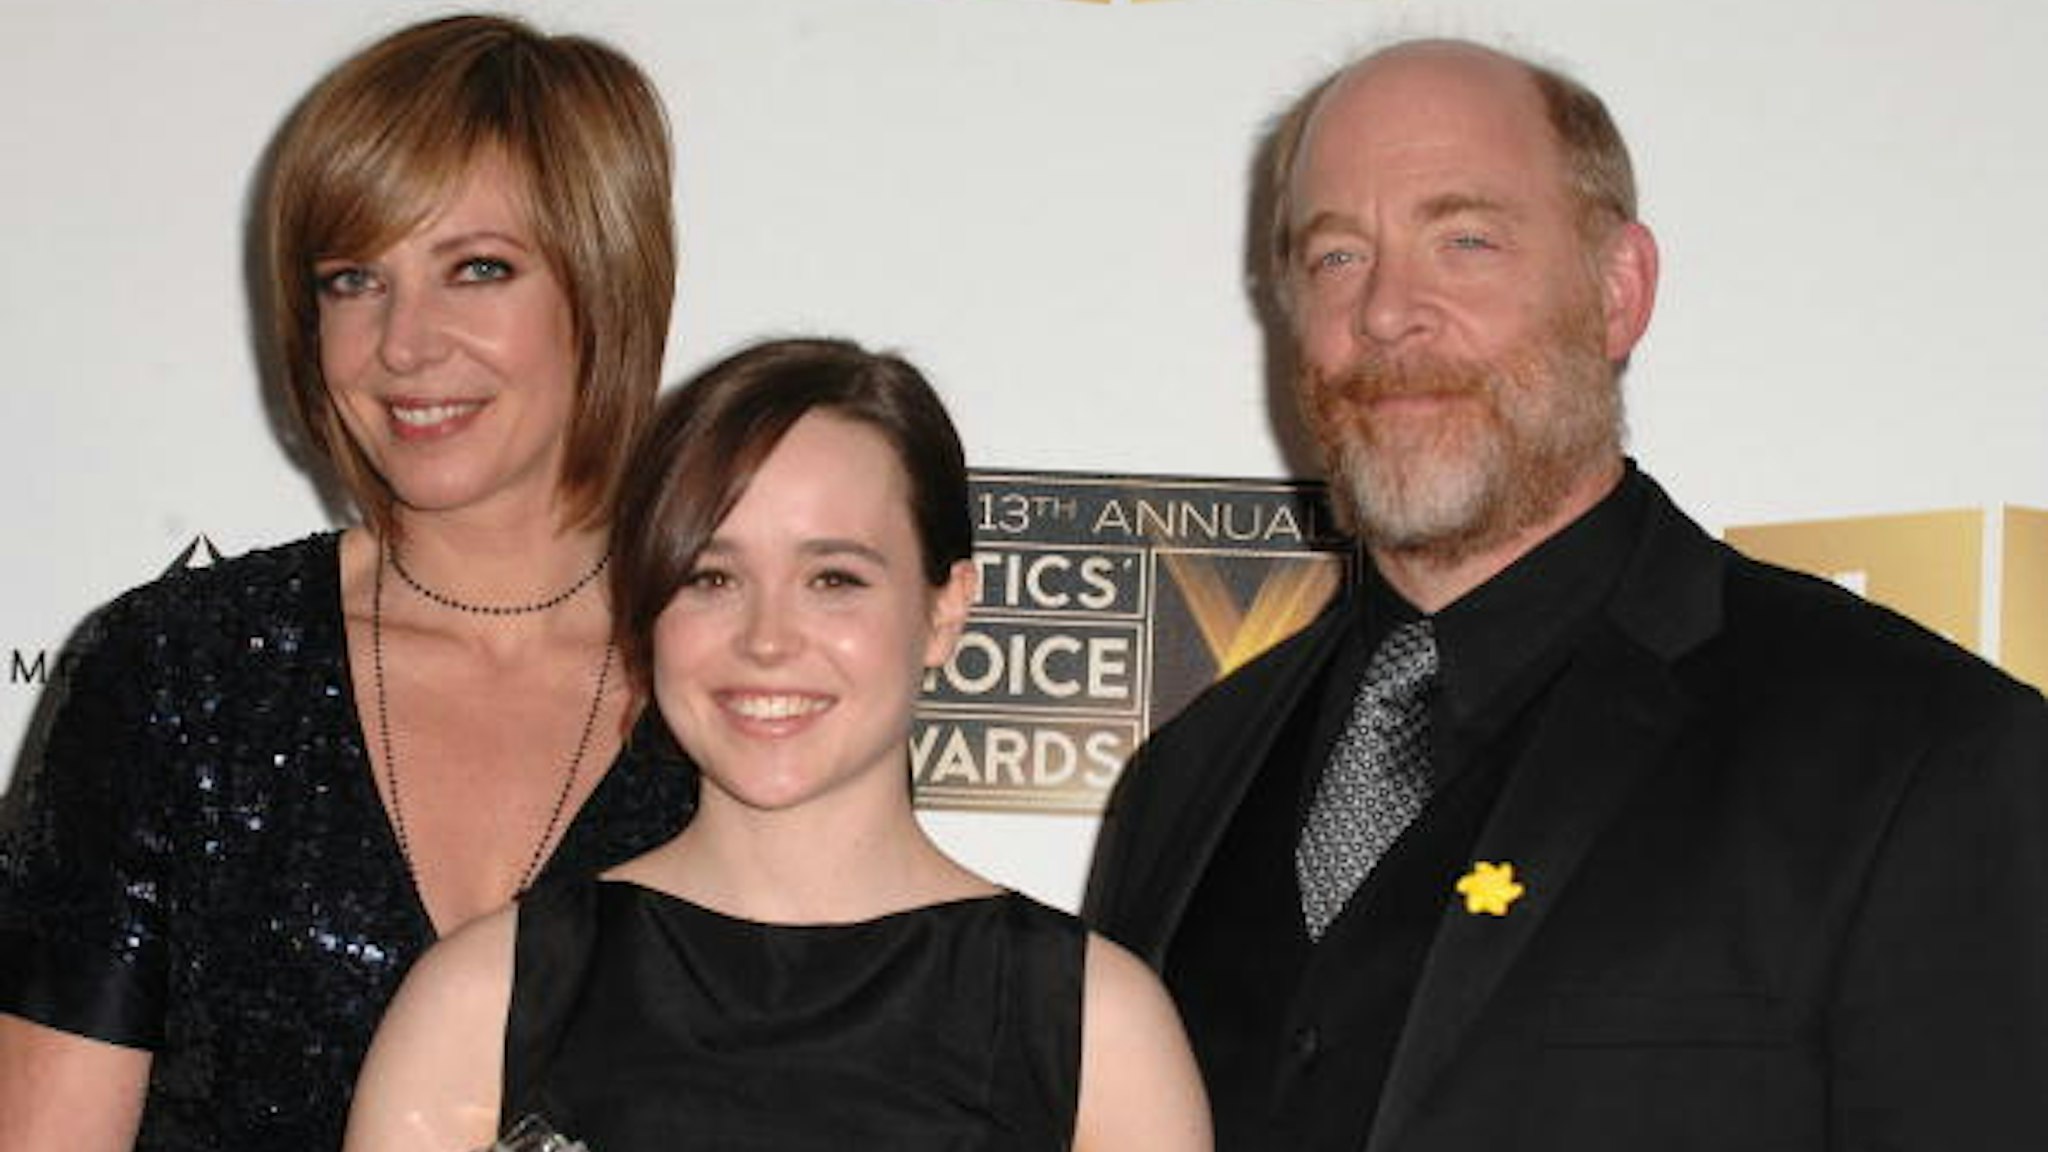 SANTA MONICA, CA - JANUARY 07: Actress Allison Janney, actress Ellen Page and actor J.K. Simmons at the 13th ANNUAL CRITICS' CHOICE AWARDS at the Santa Monica Civic Auditorium on January 7, 2008 in Santa Monica, California.